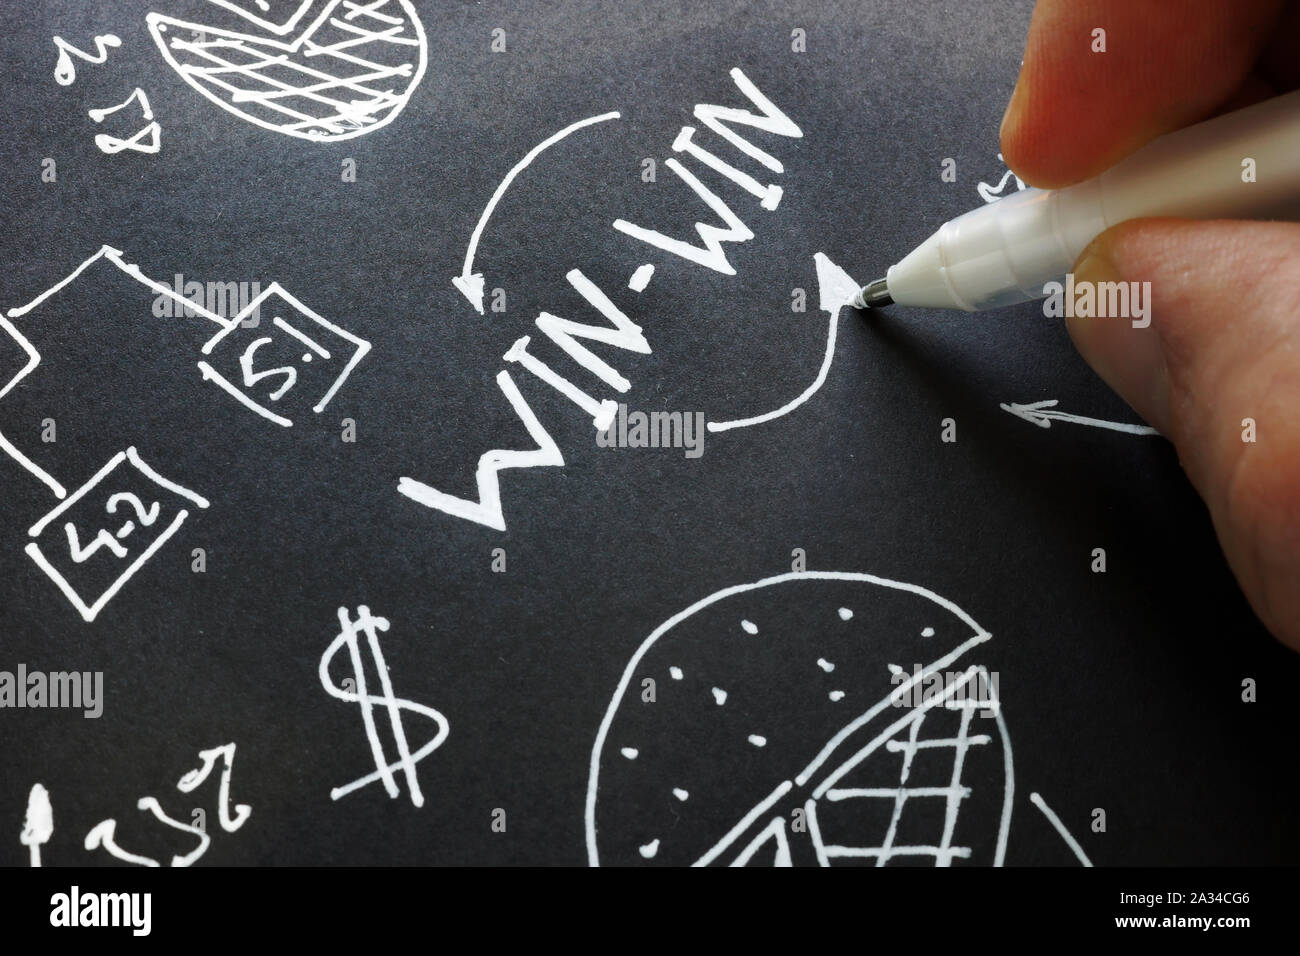 Man is writing Win-Win negotiation or solution. Stock Photo